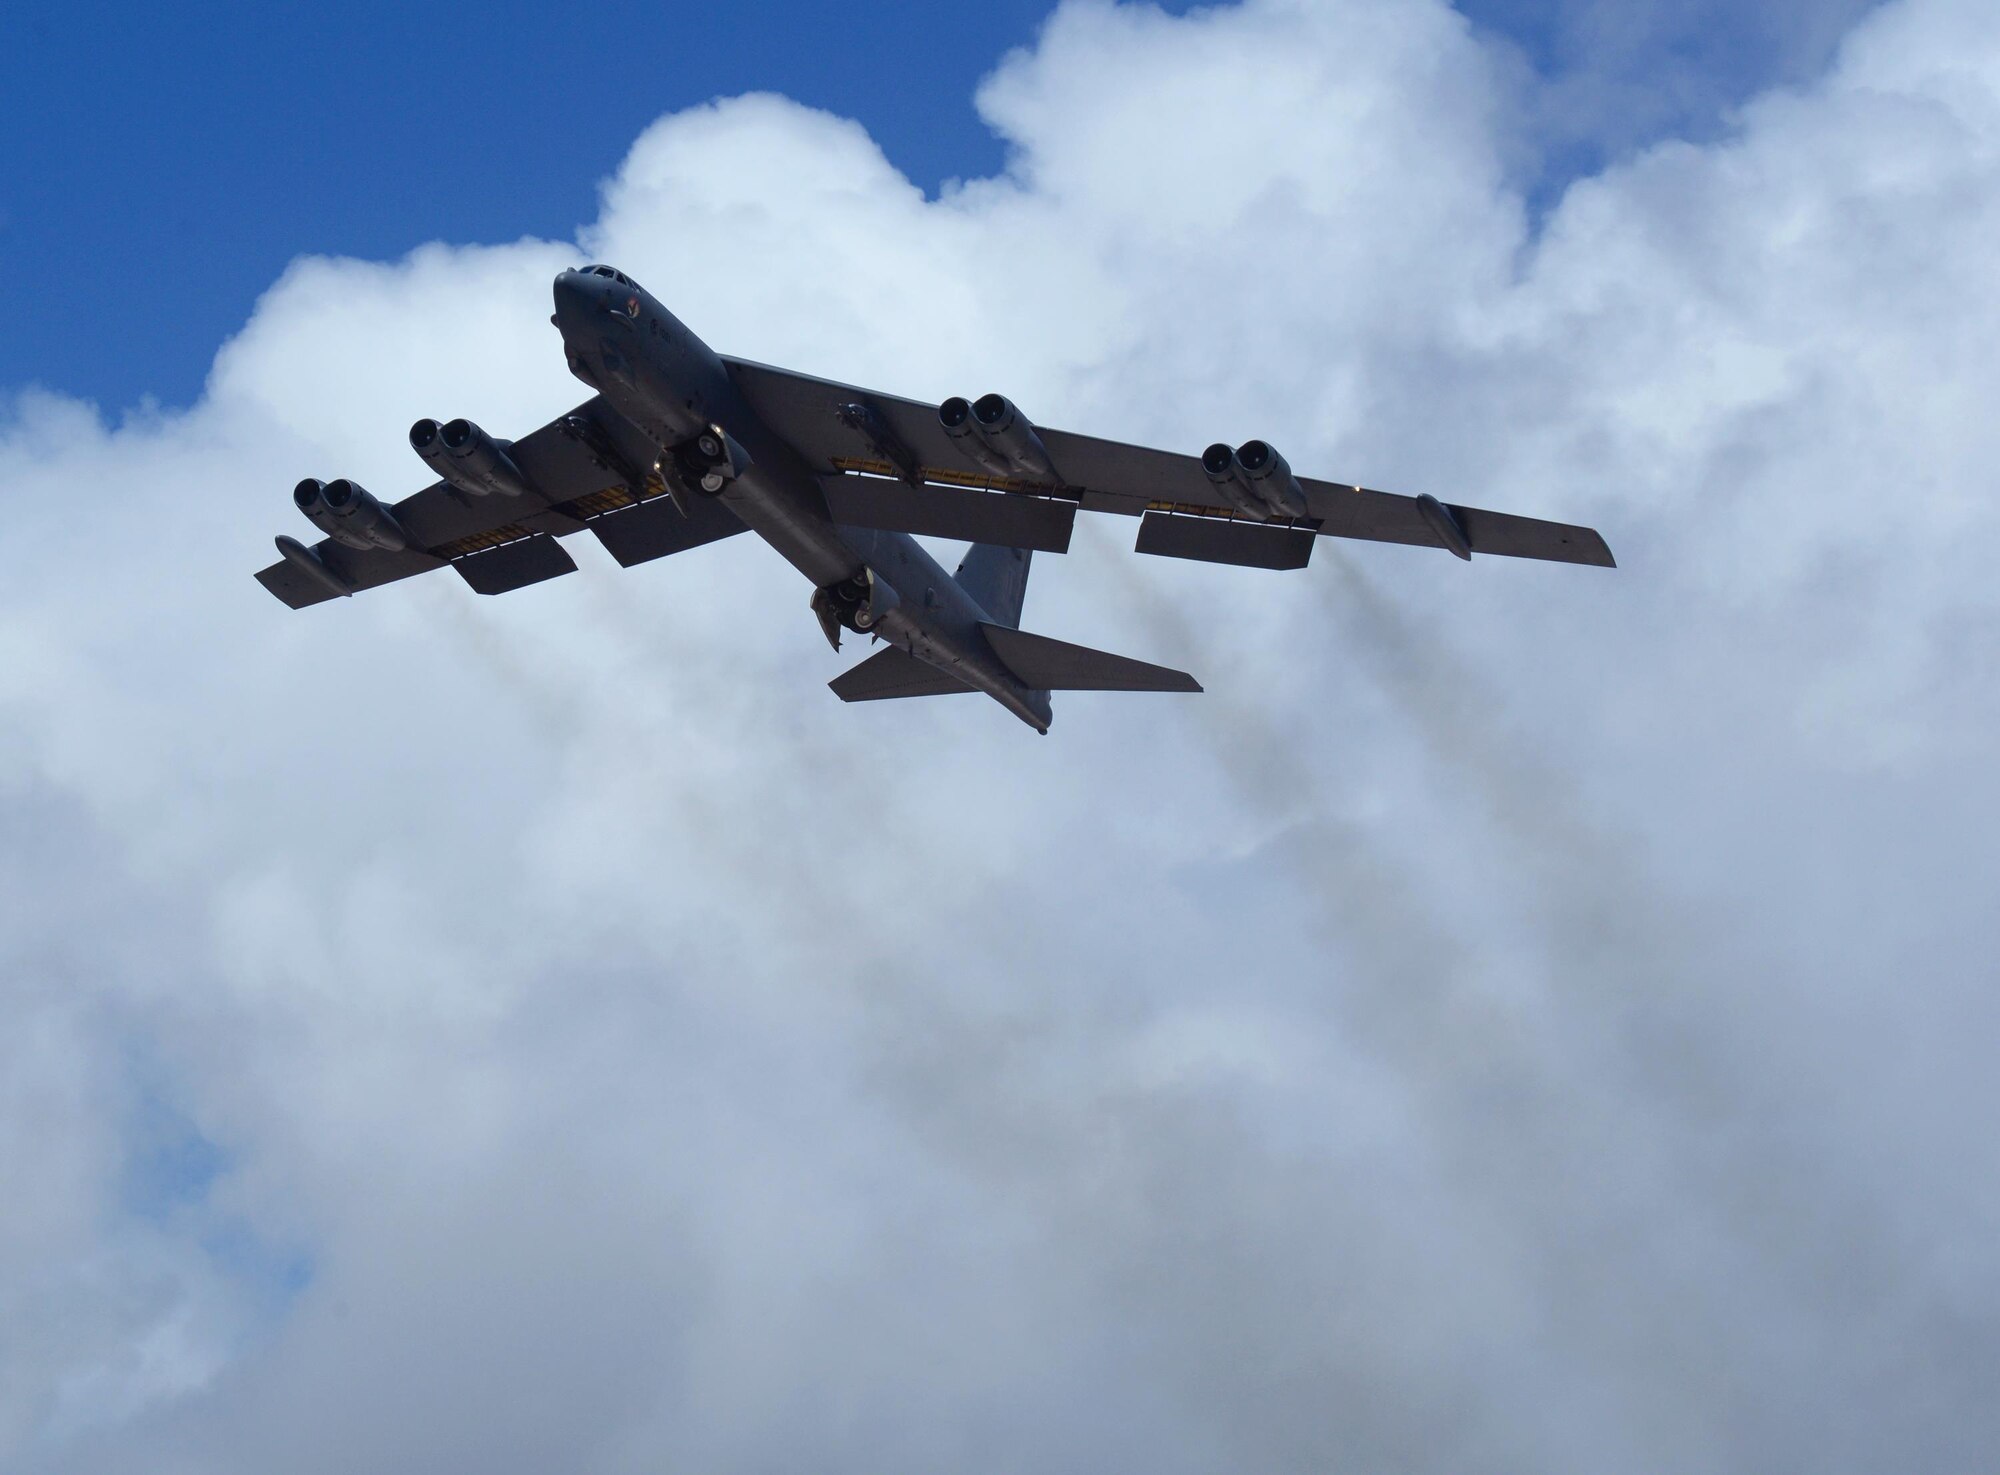 A U.S Air Force B-52 Stratofortress bomber from Minot Air Force Base, North Dakota, takes flight June 16, 2016, at Andersen Air Force Base, Guam. The aircraft is deployed in support of U.S. Pacific Command’s Continuous Bomber Presence operations. These aircraft and the men and women who fly and support them provide a significant capability that enables U.S. readiness and commitment to deterrence, provides assurances to allies, and strengthens regional security and stability in the Indo-Asia-Pacific region. (U.S. Air Force photo by Airman 1st Class Alexa Ann Henderson/Released)